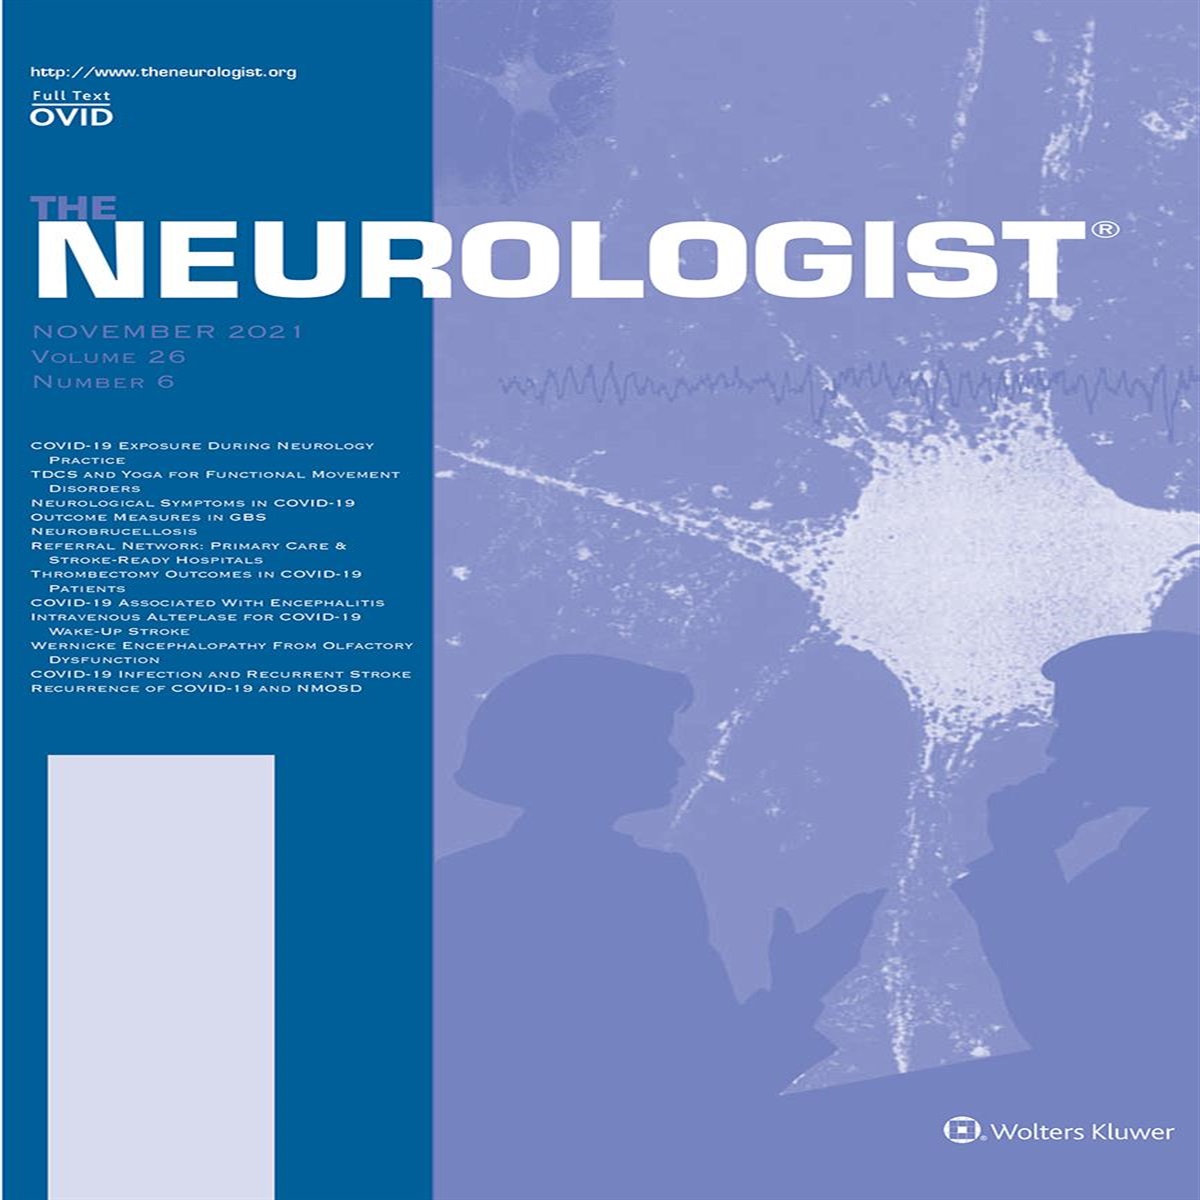 Recurrence of COVID-19 in a Patient With NMO Spectrum Disorder While Treating With Rituximab: A Case Report and Review of the Literature